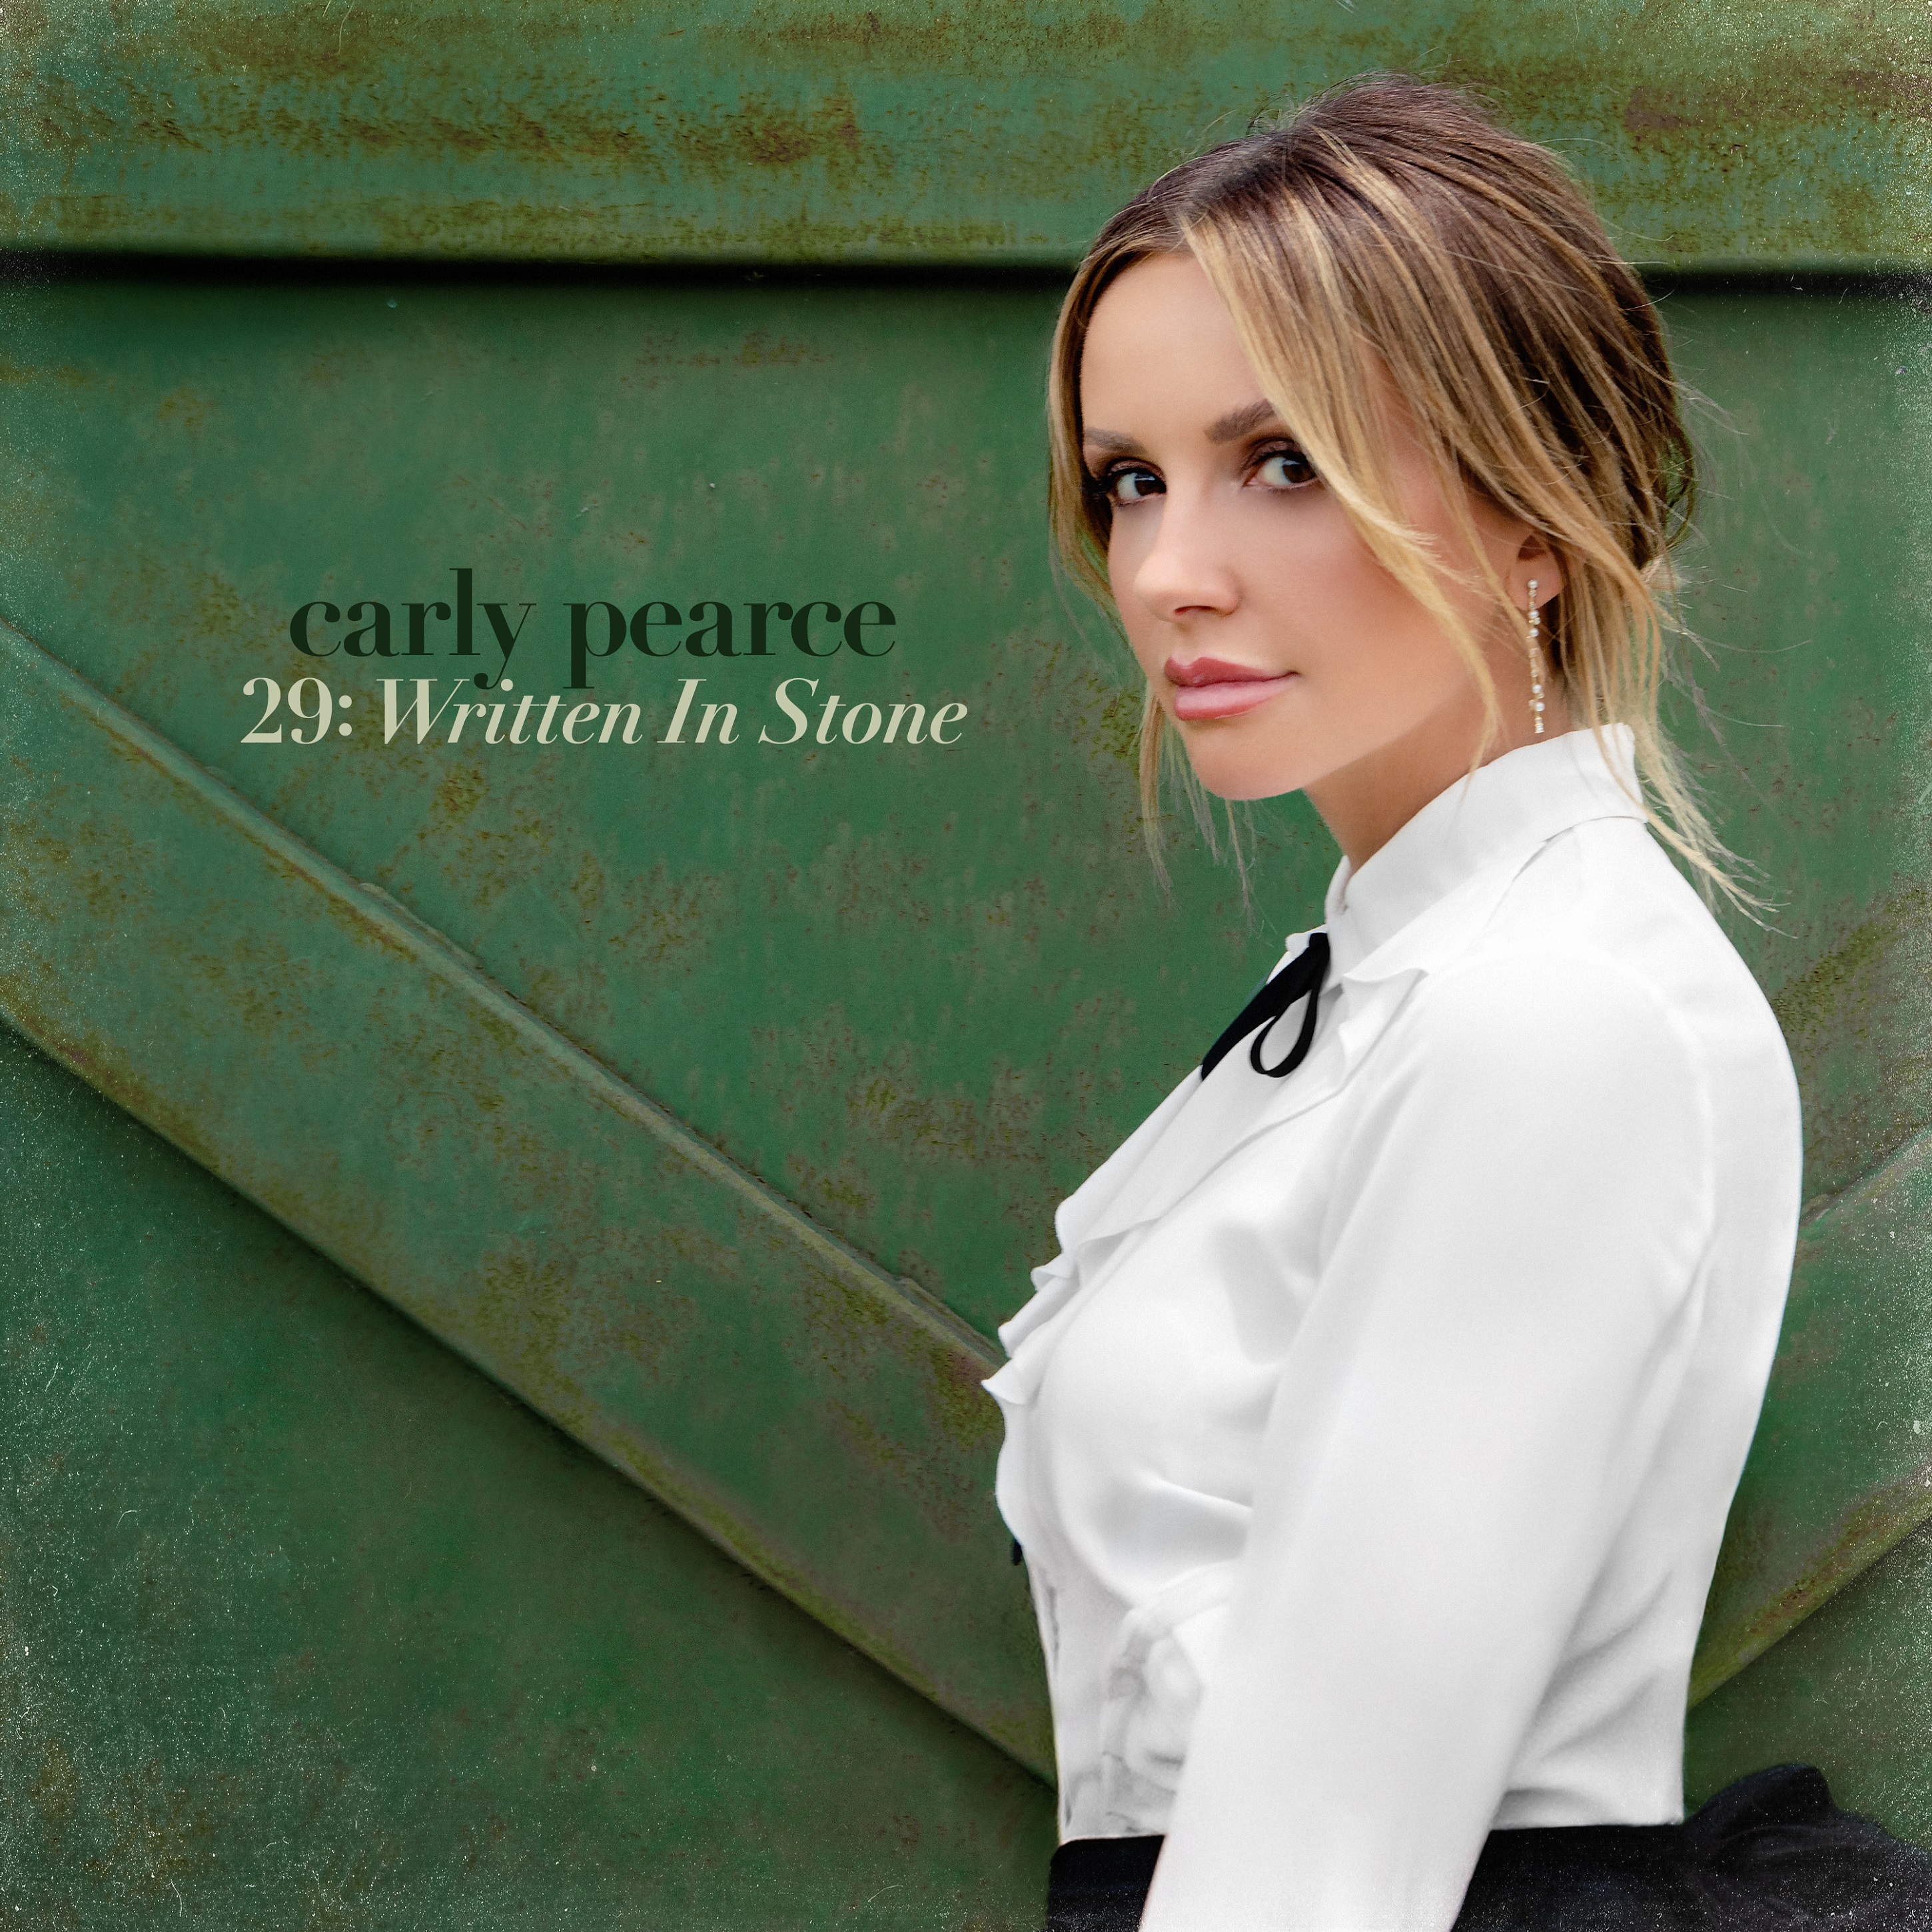 Carly Pearce is Bringing Her 29: Written In Stone Album on Tour. The Country Daily